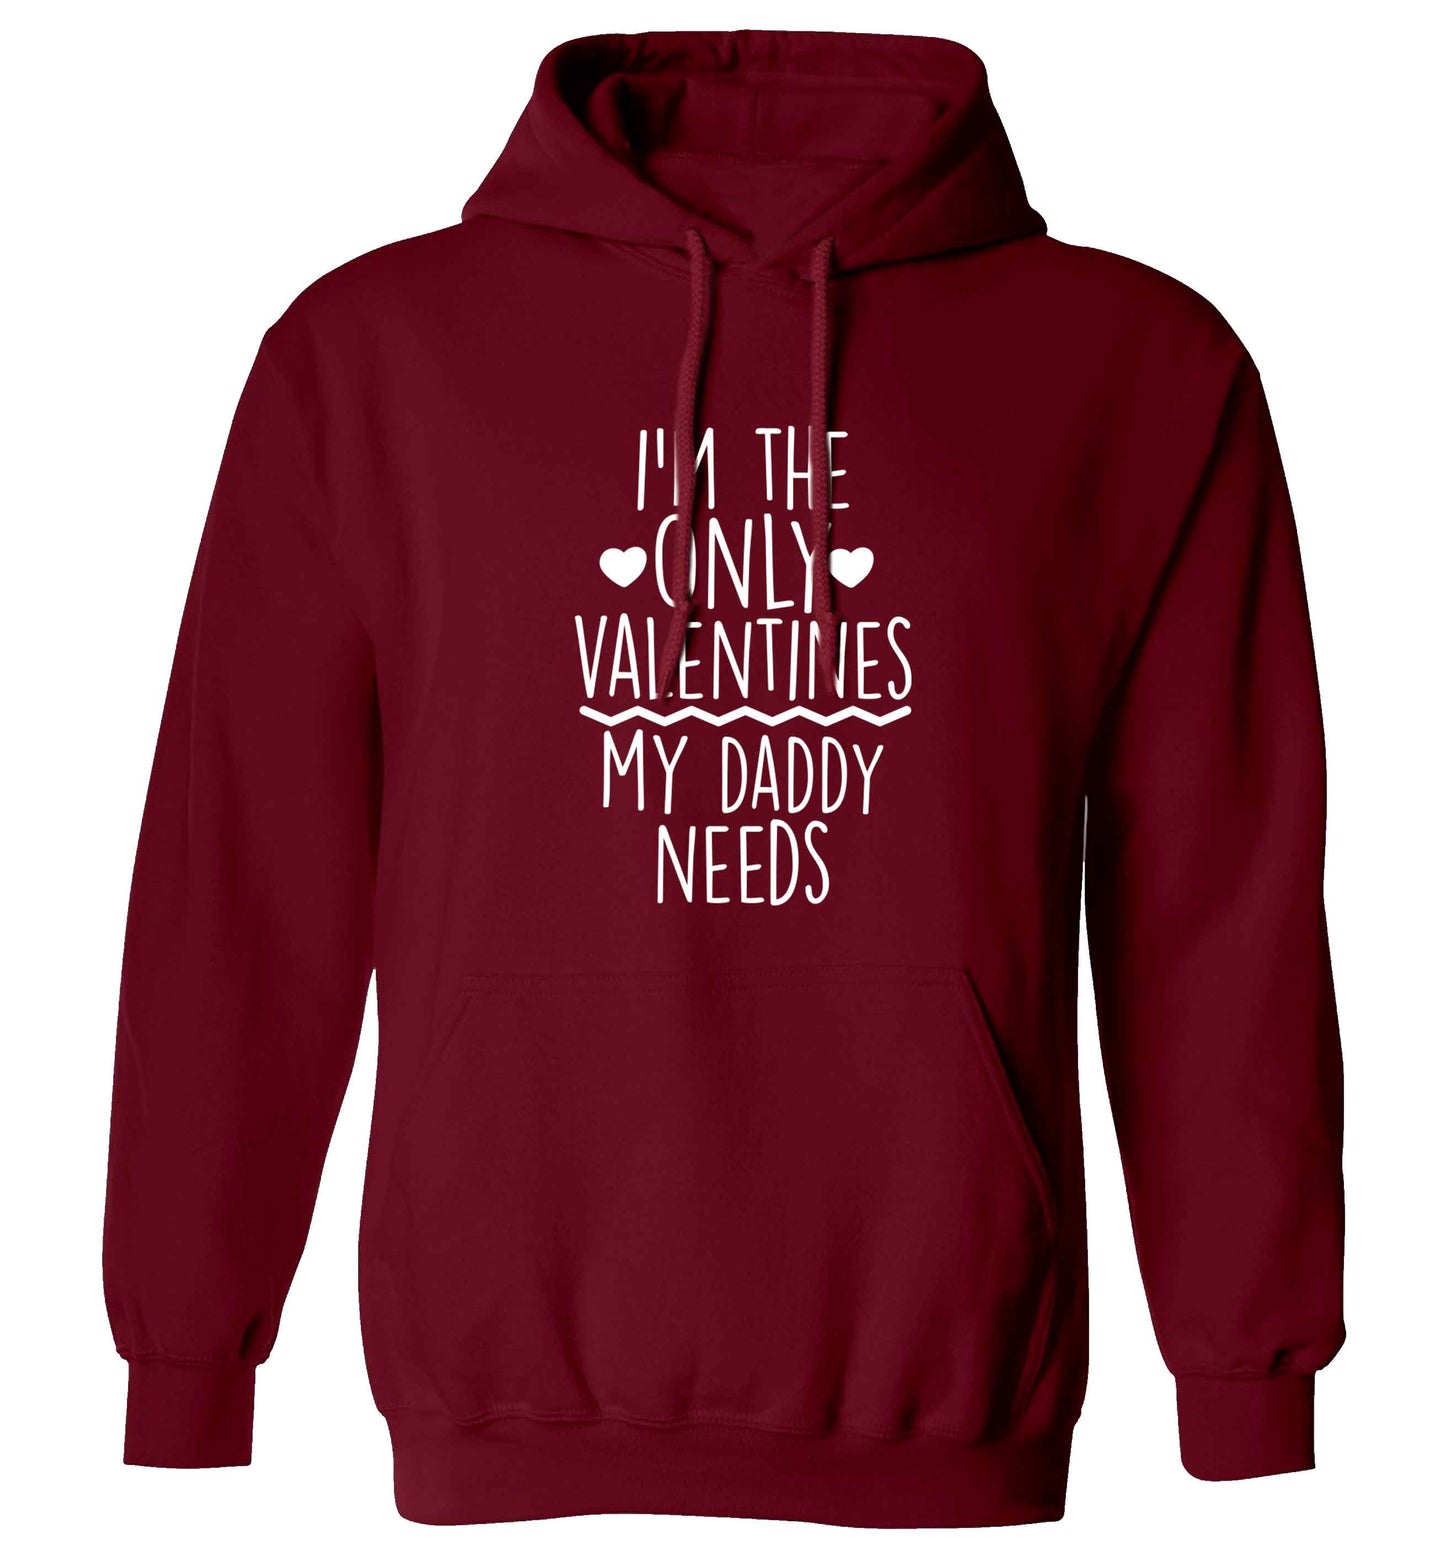 I'm the only valentines my daddy needs adults unisex maroon hoodie 2XL